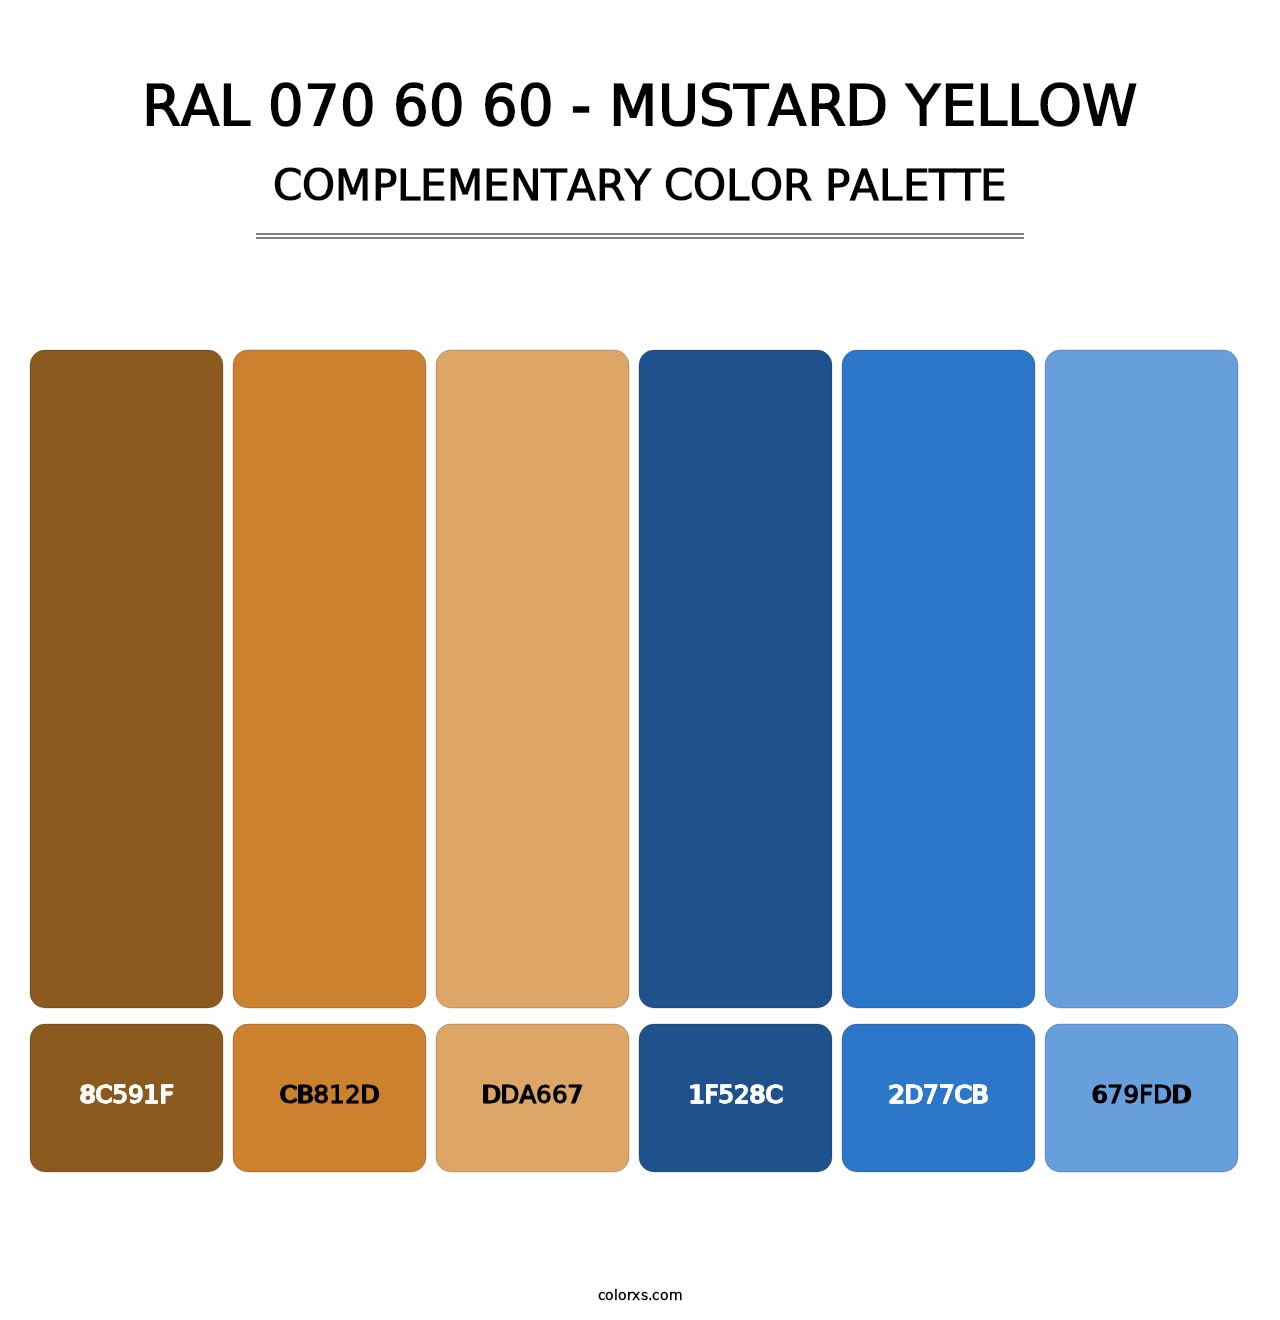 RAL 070 60 60 - Mustard Yellow - Complementary Color Palette